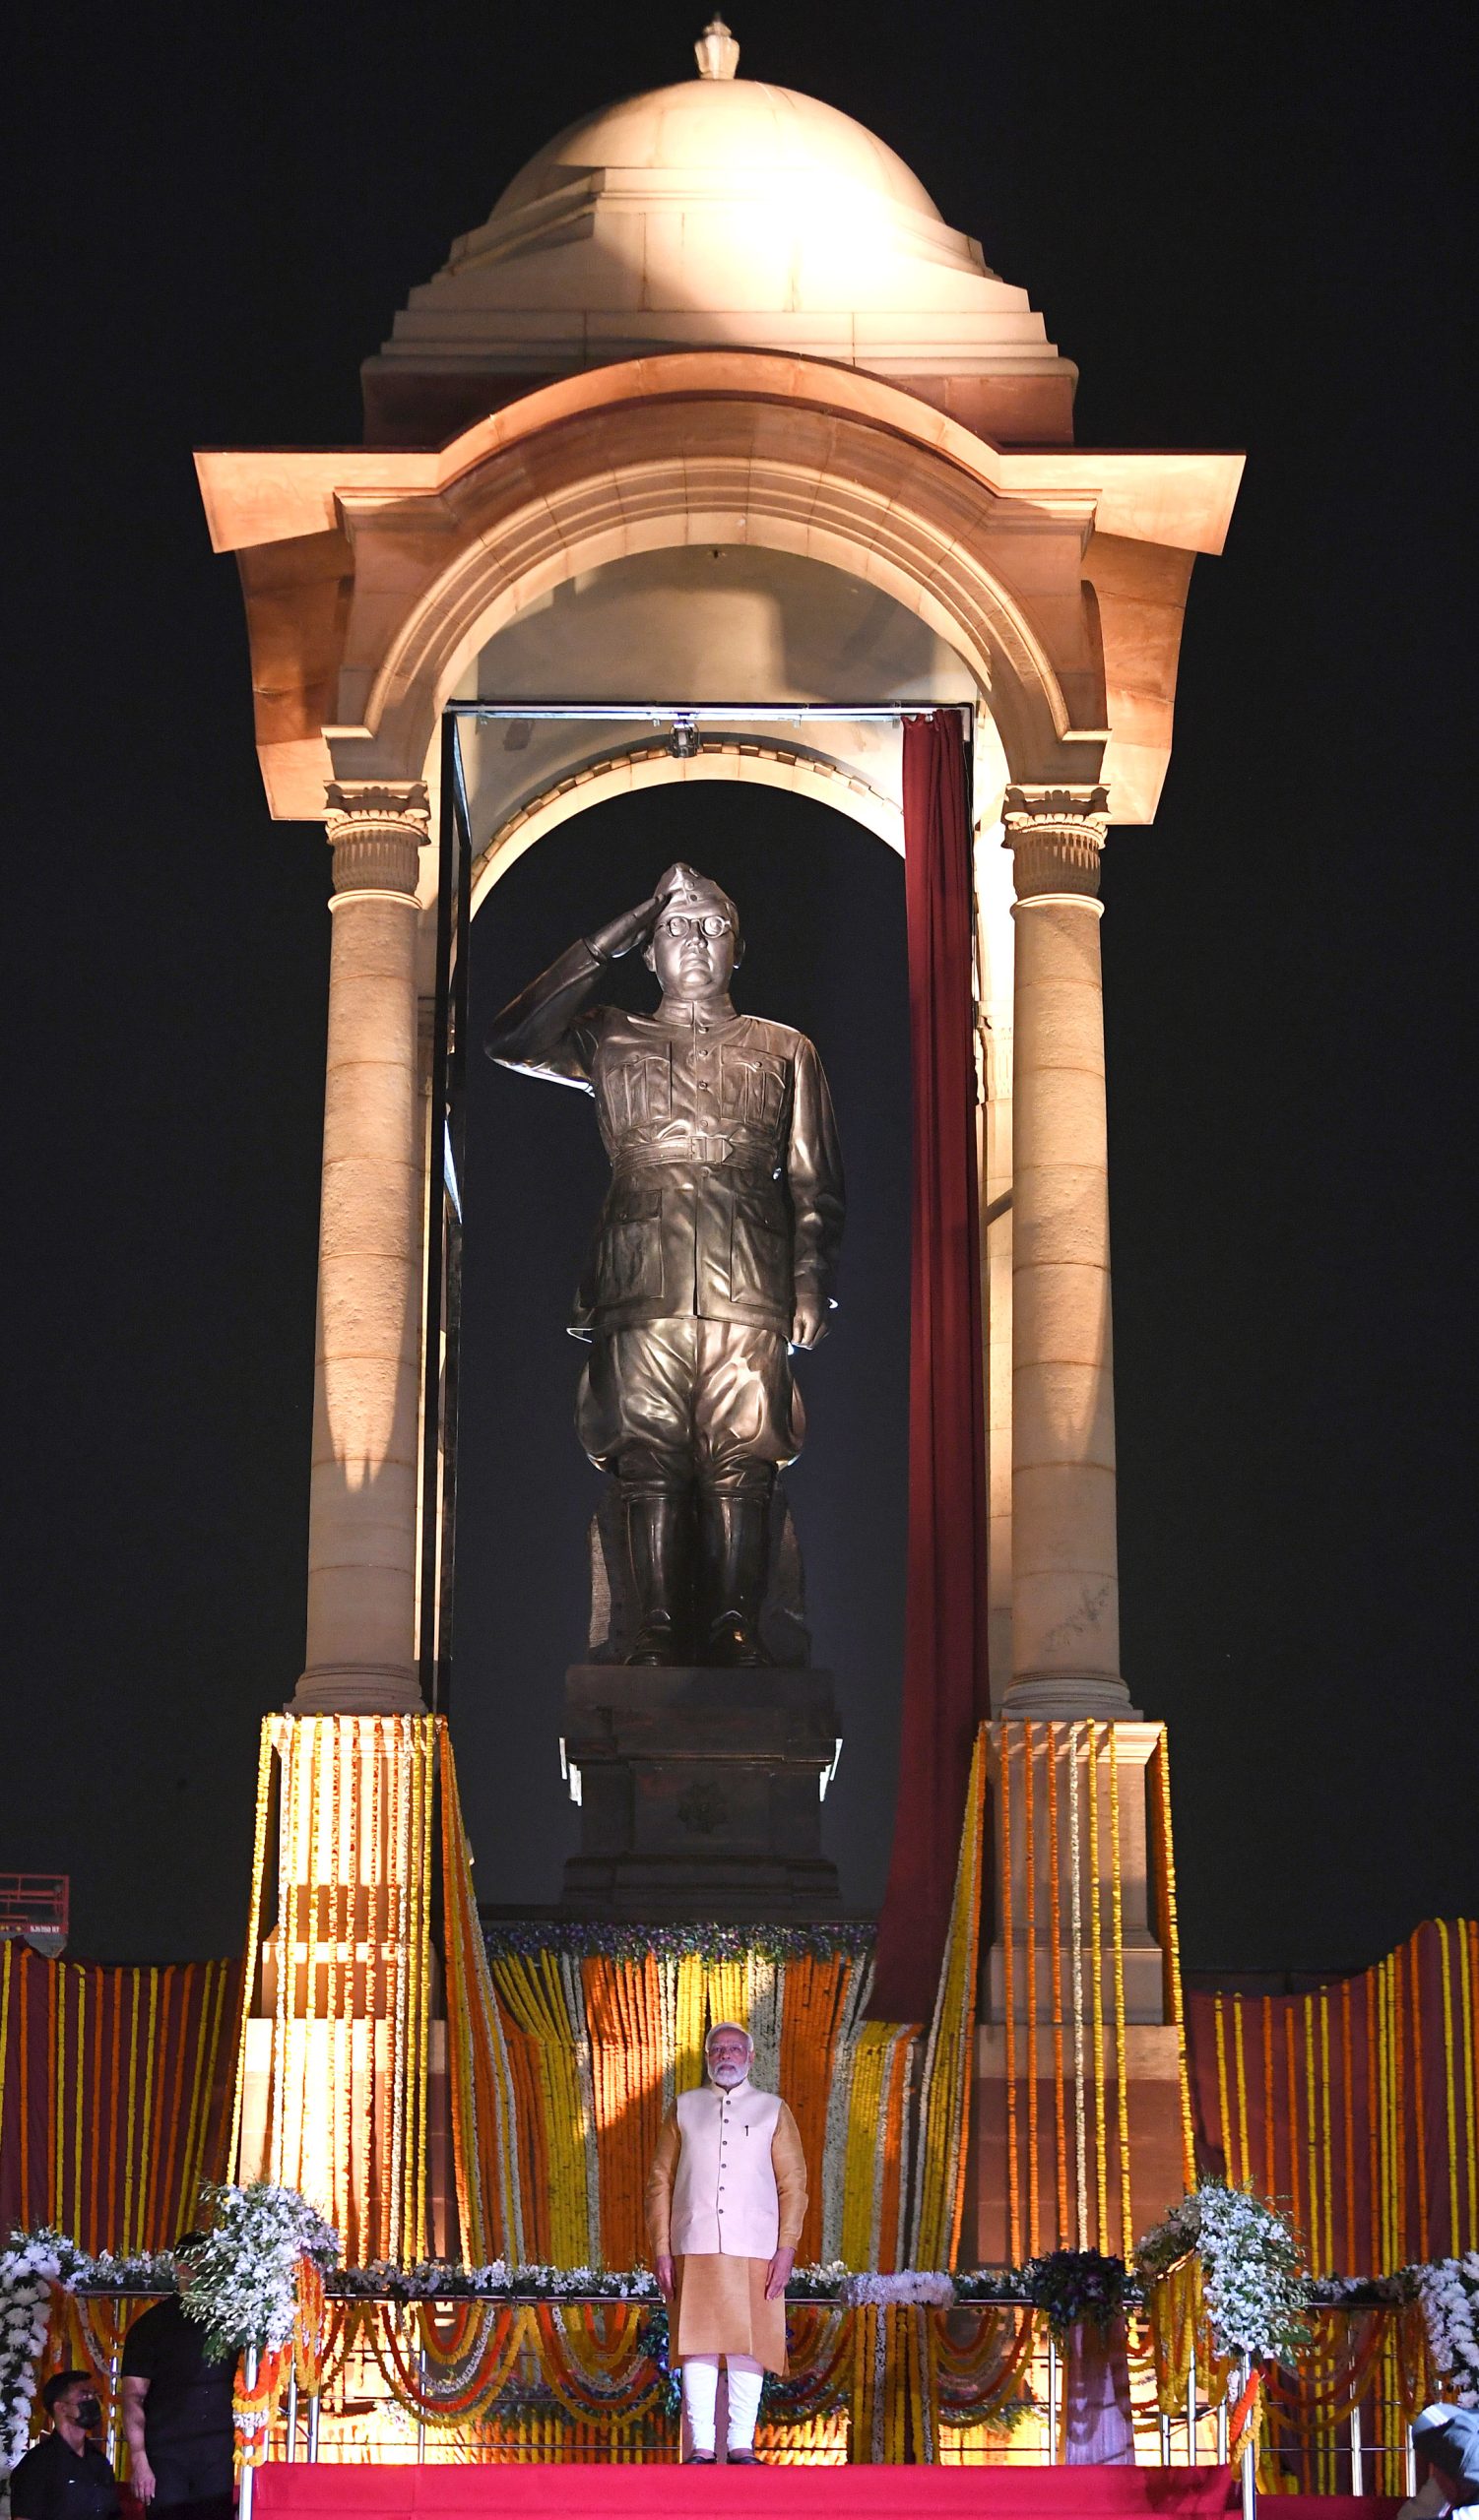 PM unveils the statue of Netaji Subhas Chandra Bose at India Gate, during the inauguration of the Kartavya Path, in New Delhi on September 08, 2022.